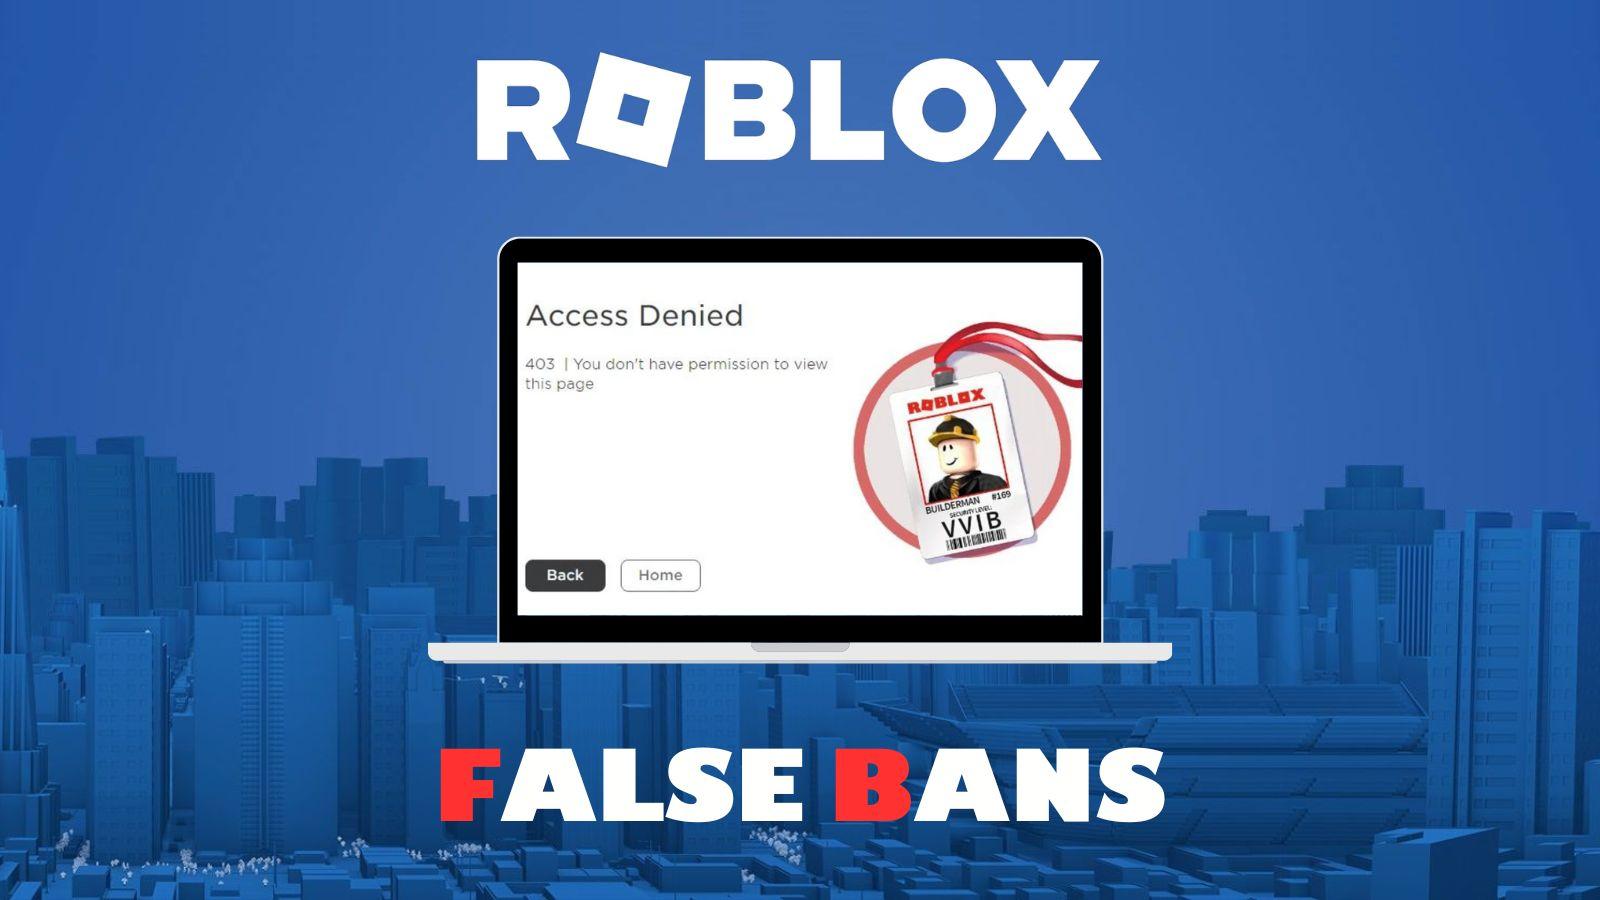 Roblox Moderation incorrectly refers to the Roblox Terms of Use